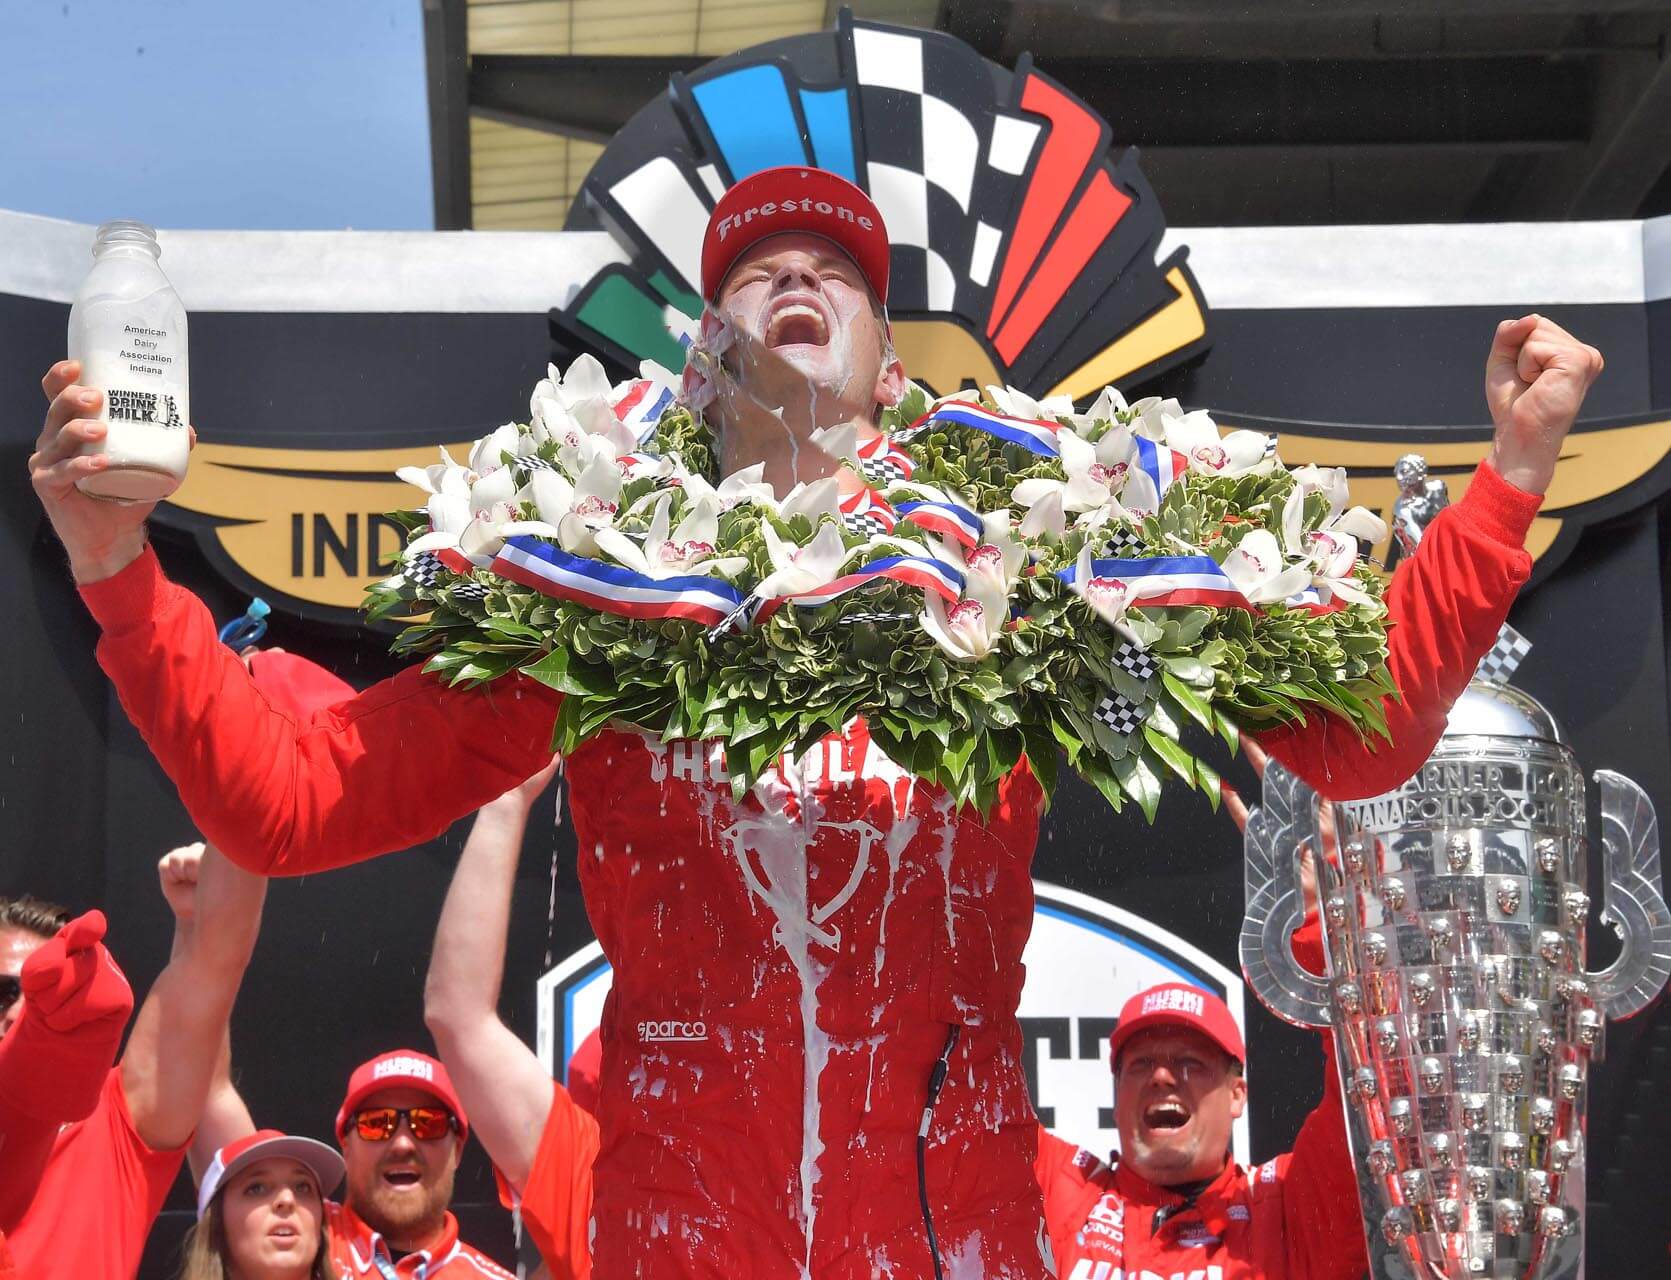 a person in red overalls with flowers and a trophy